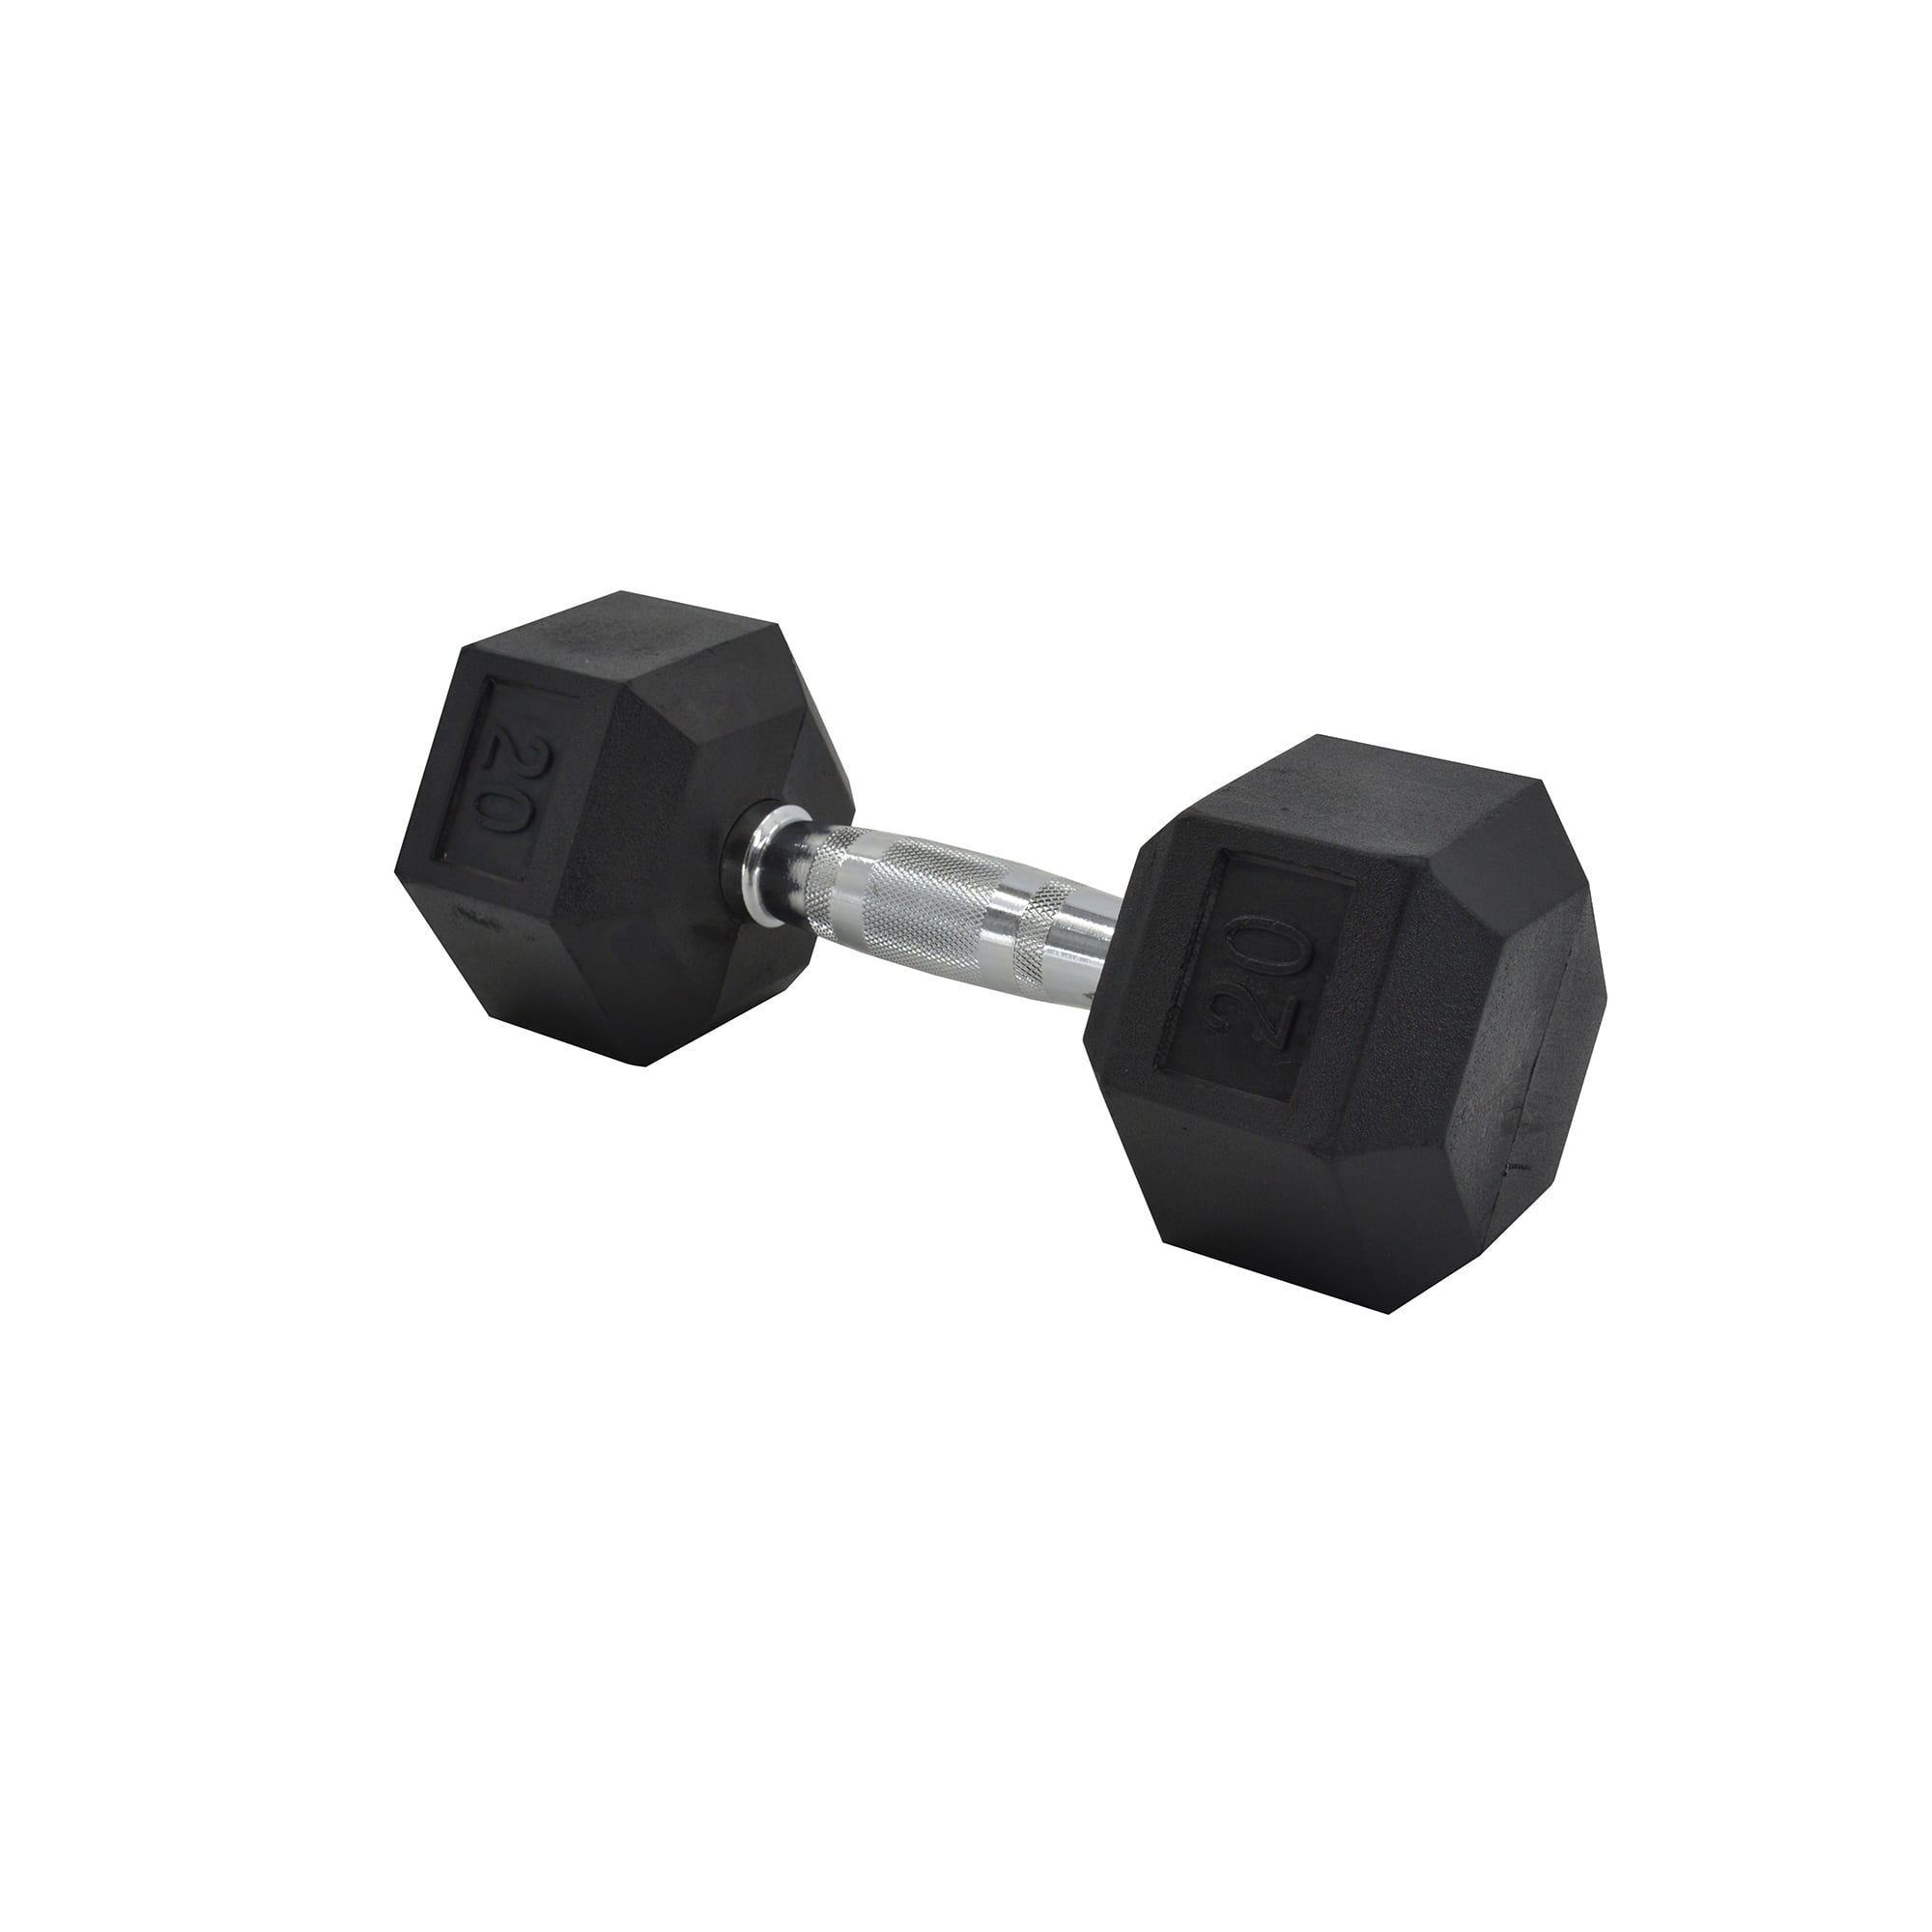 Details about   ETHOS 20 lb Set PAIR Rubber Coated Hex Dumbbells 40 lbs Pound total SHIPS FAST! 